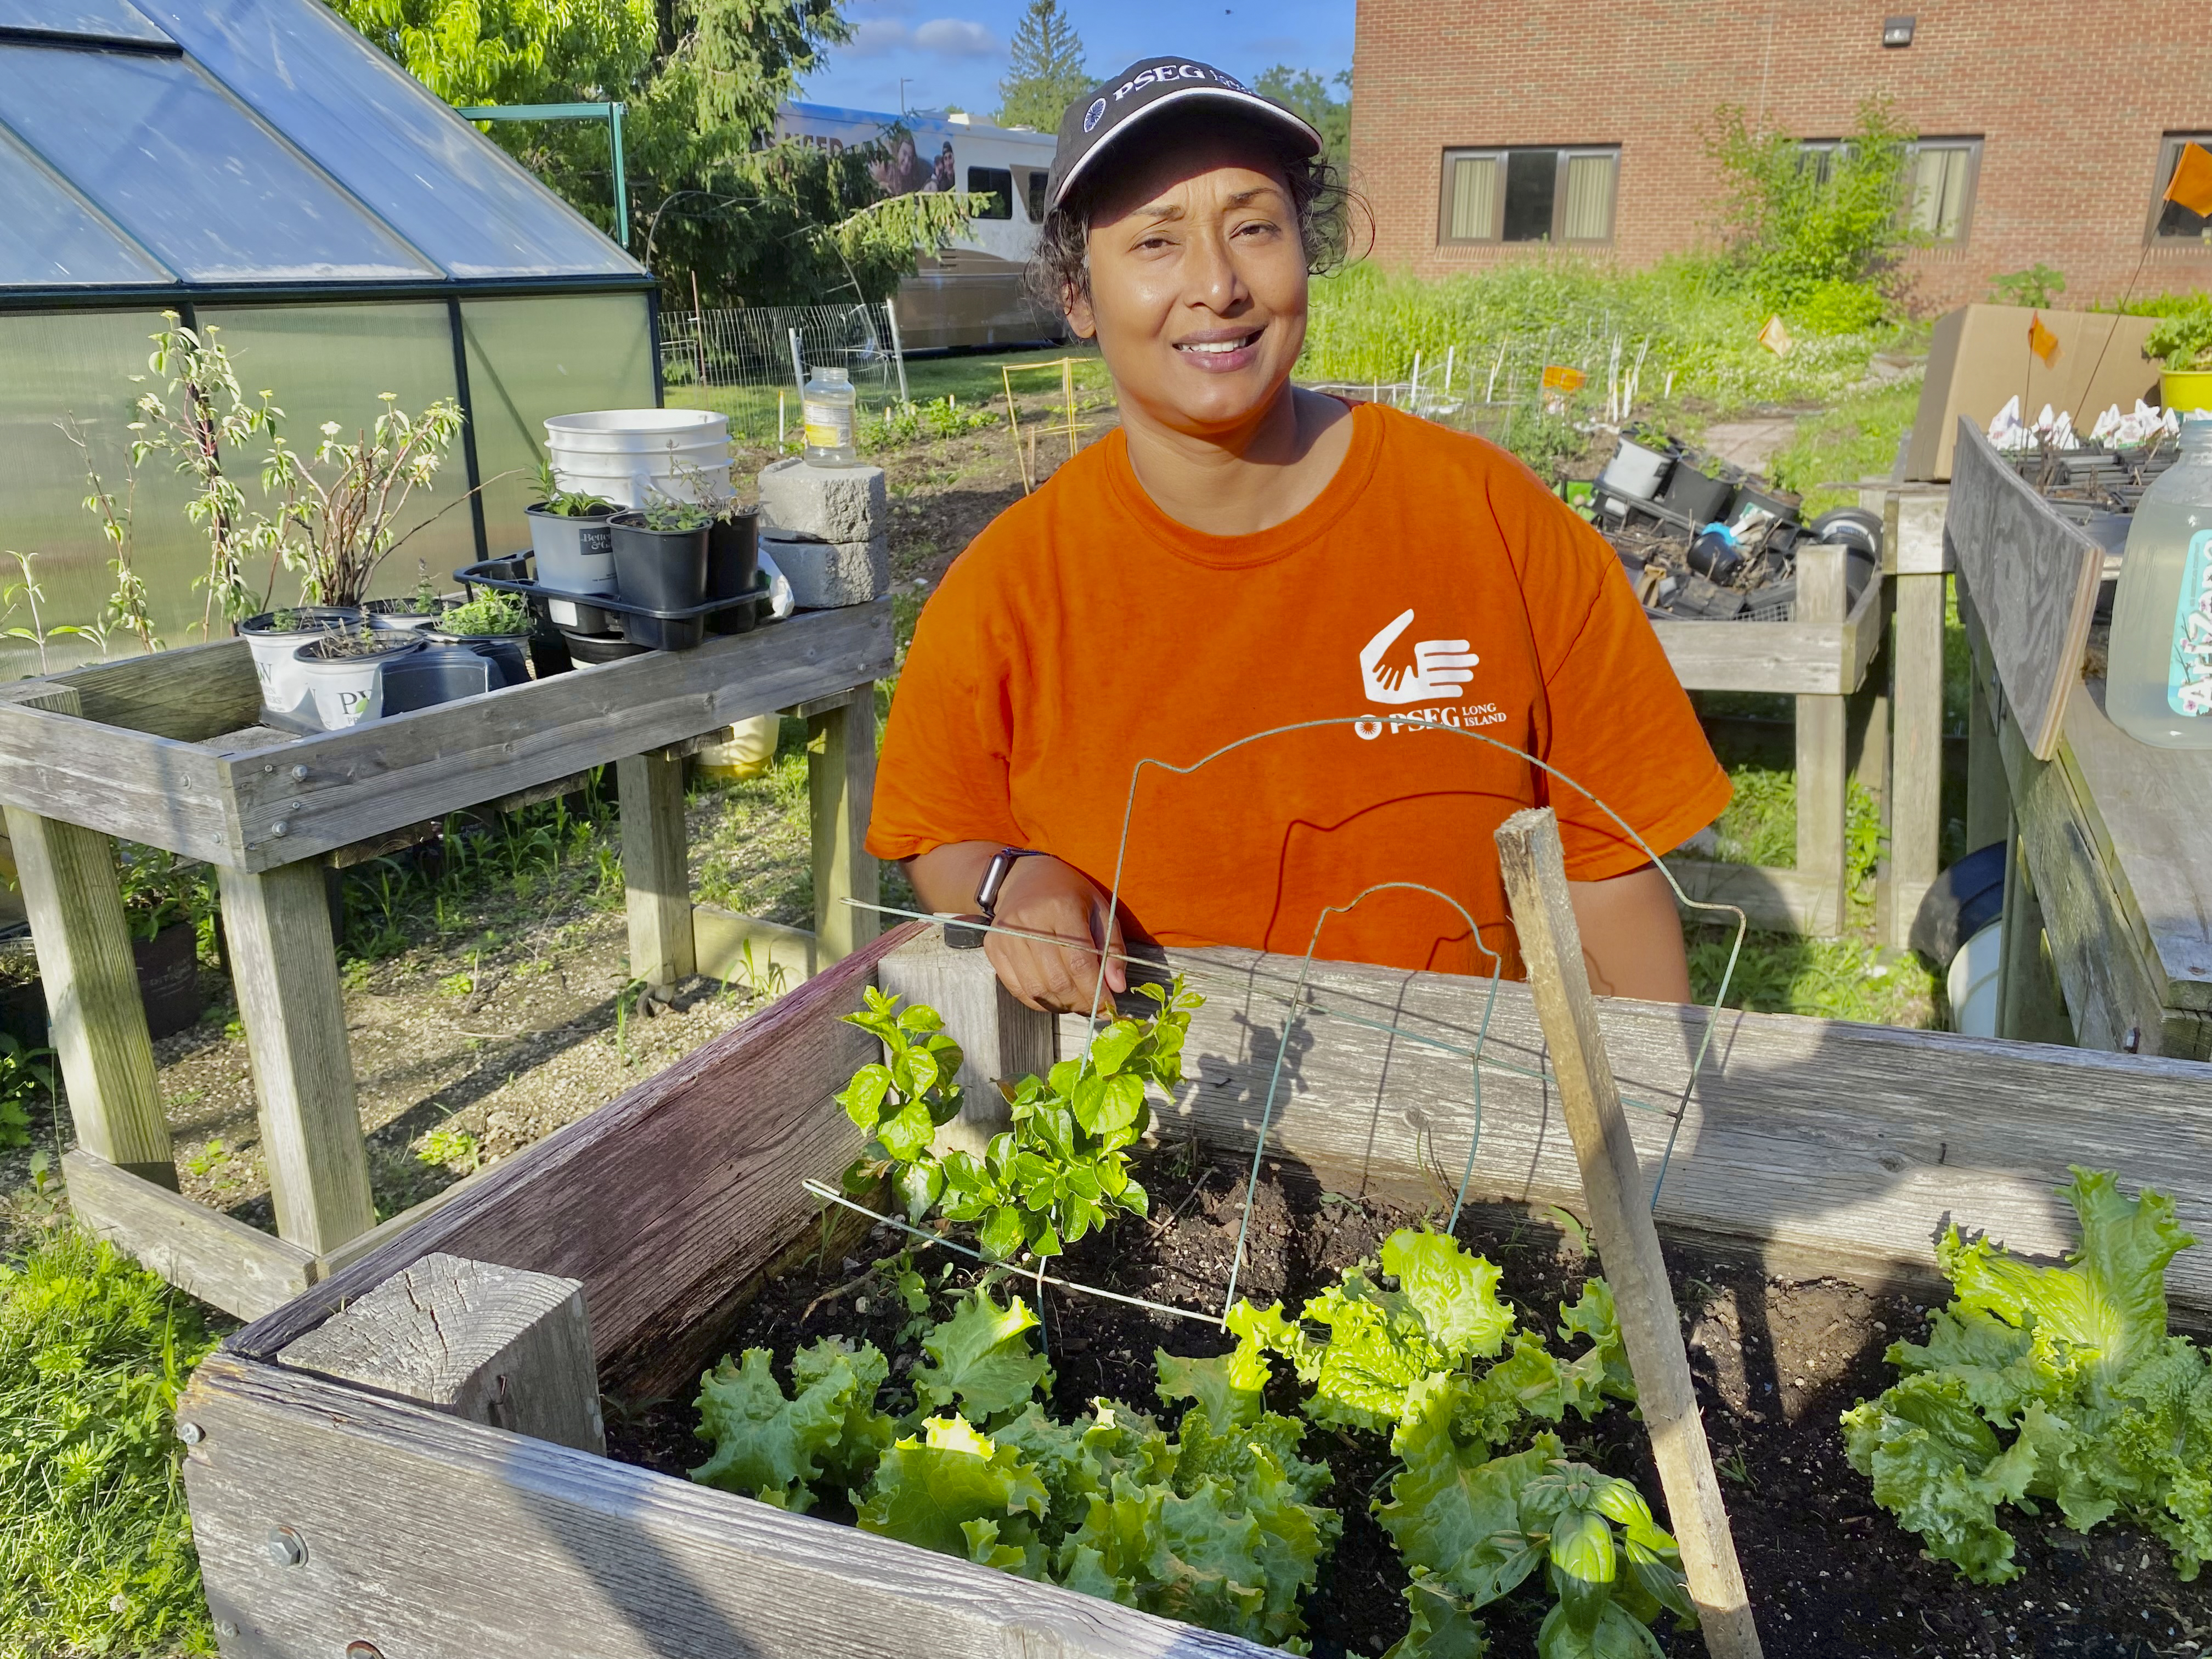 Photo caption: PSEG Long Island’s Gracia DeSilva, senior administrative assistant, volunteers every week at The Long Island Coalition for the Homeless (LICH) Community Garden to support local homeless veterans.